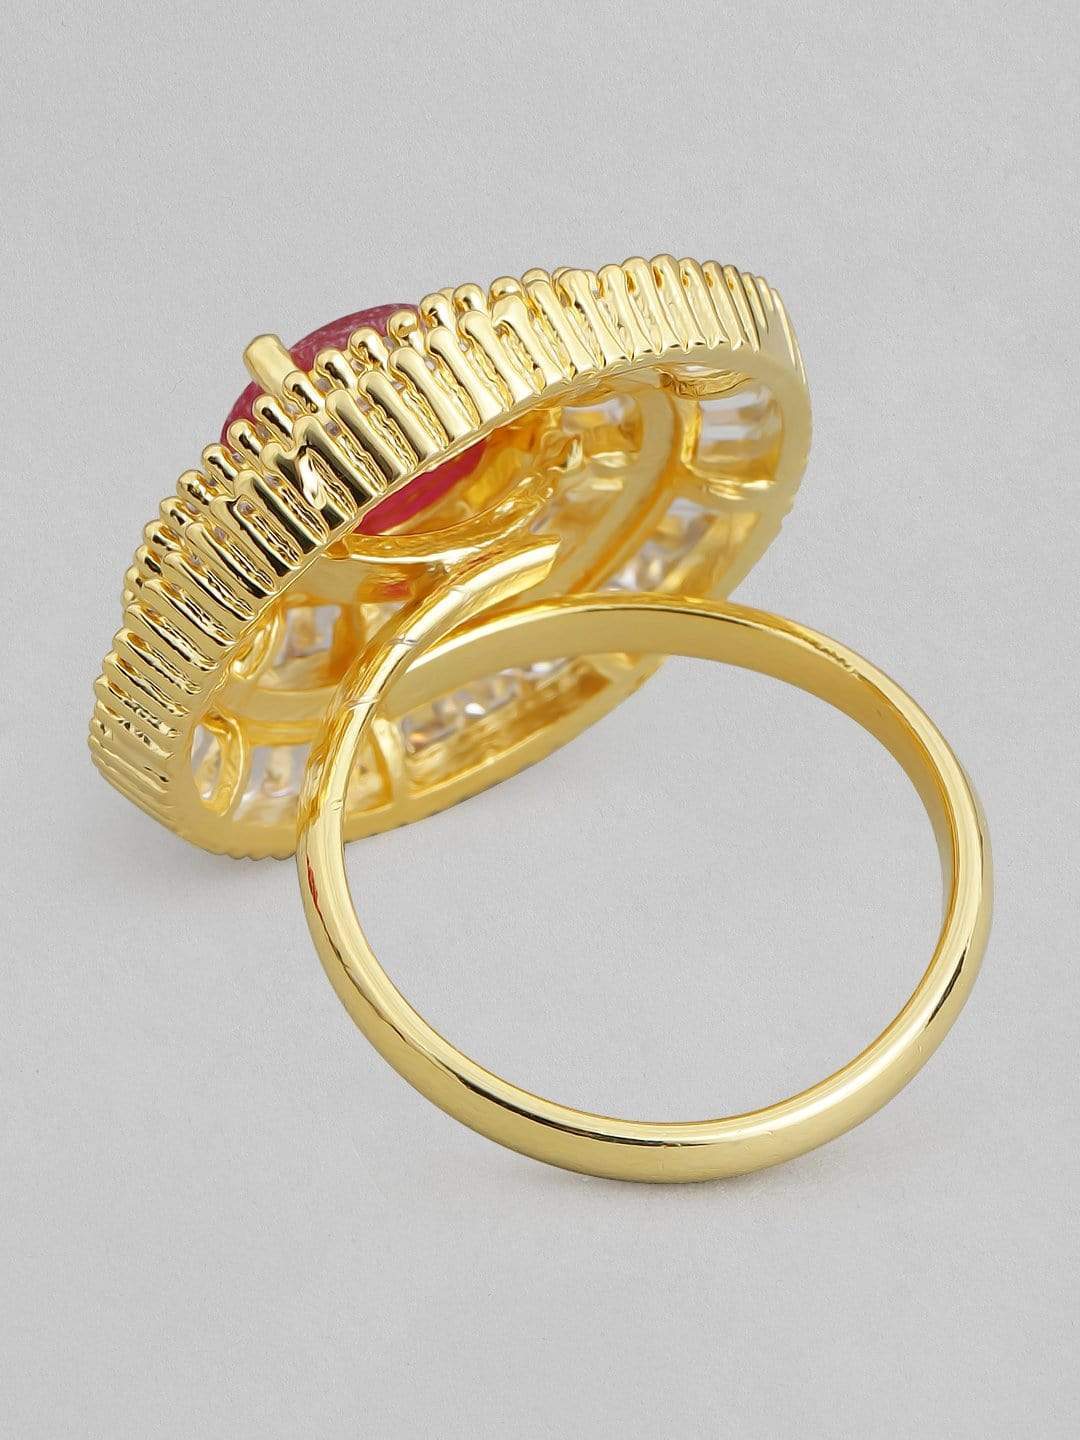 Buy Women's Long Gold-Plated Adjustable Rings By Bindhani